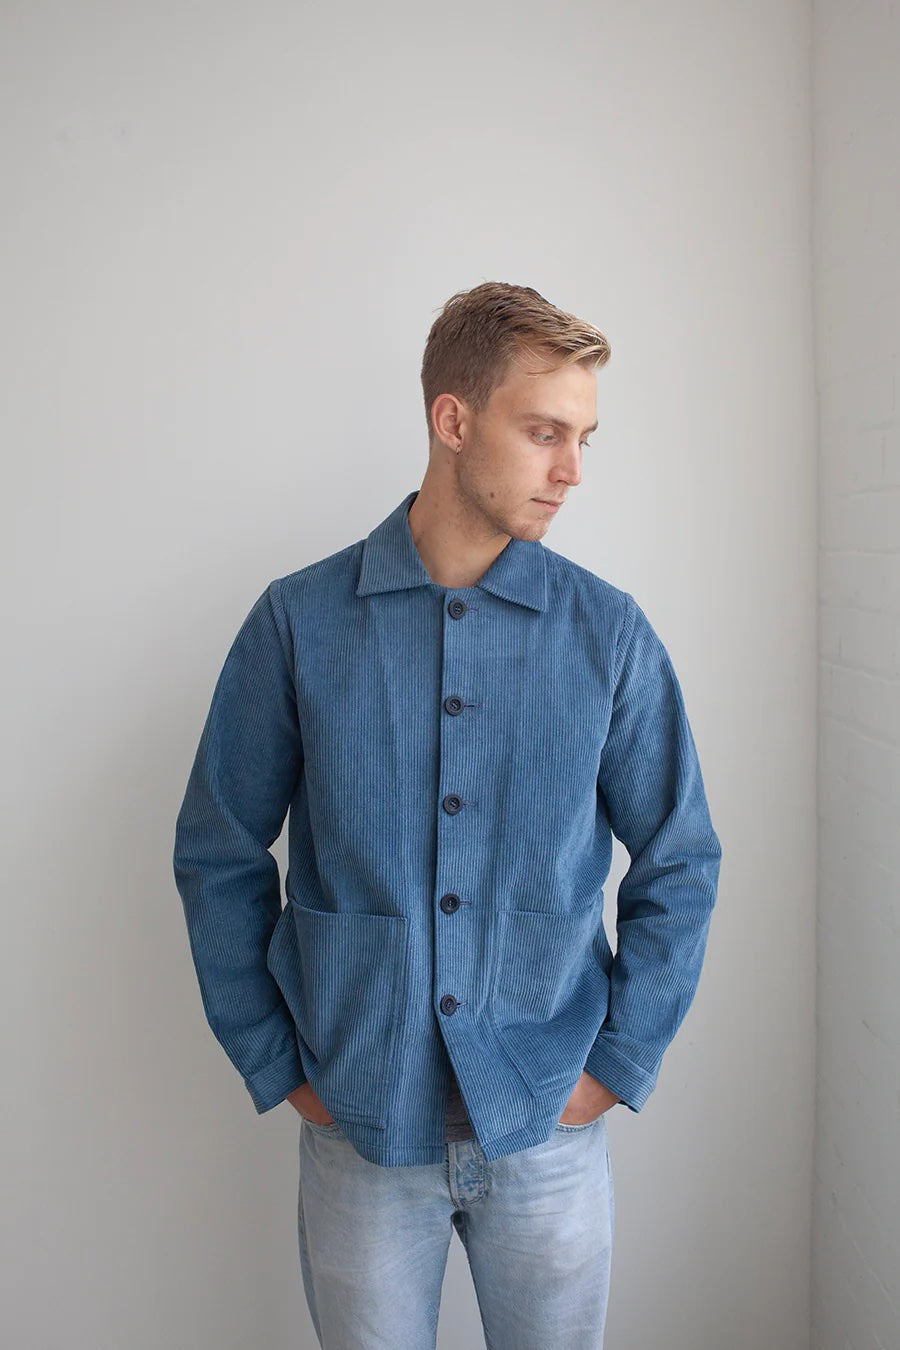 Man wearing the Men's Jaime Jacket sewing pattern from The Modern Sewing Co. on The Fold Line. A jacket pattern made in denim, corduroy, twill/drill/gabardine, heavy linen/hemp, thin wool and waxed cotton fabrics, featuring a curved back yoke front patch 